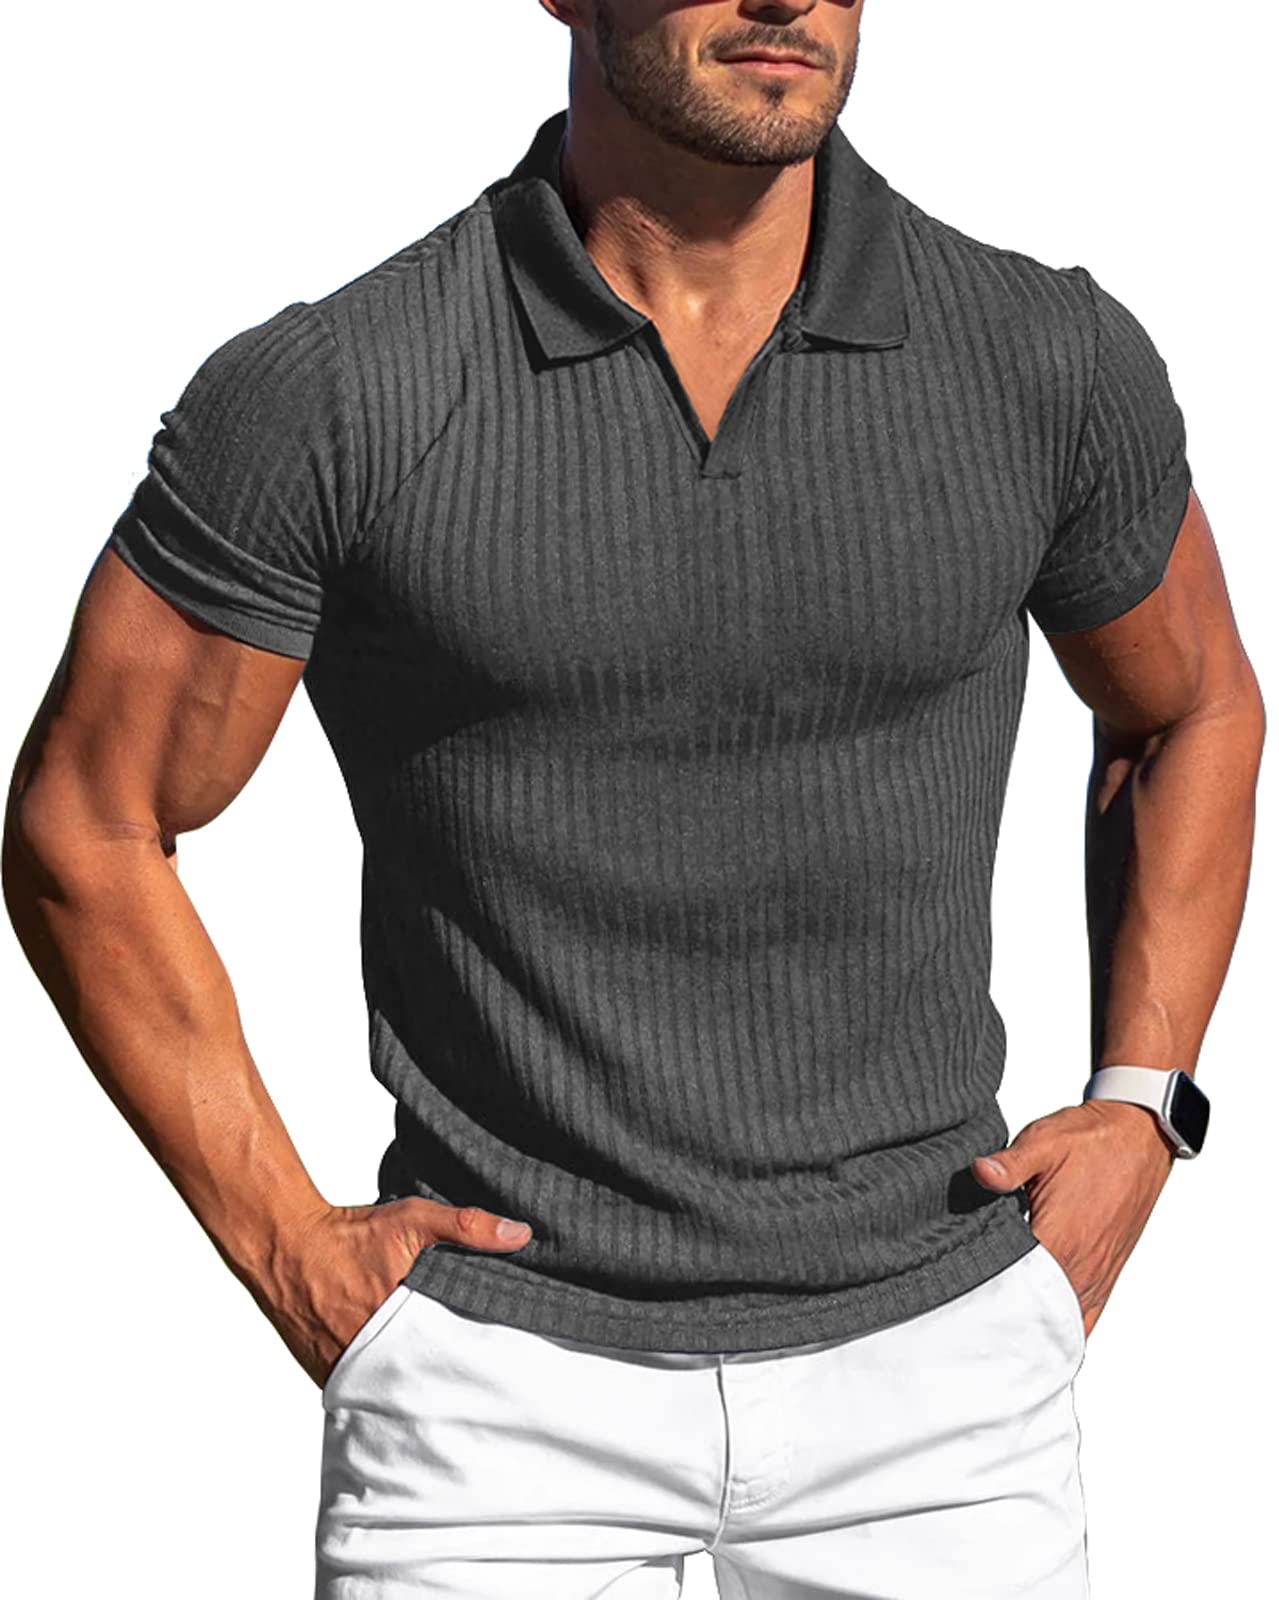 Lempue Mens V Neck t Shirts Slim Fit Muscle Polo Shirts for Men Short  Sleeve Dry Fit Golf Shirts Casual Stylish Cloths Dark Grey Large